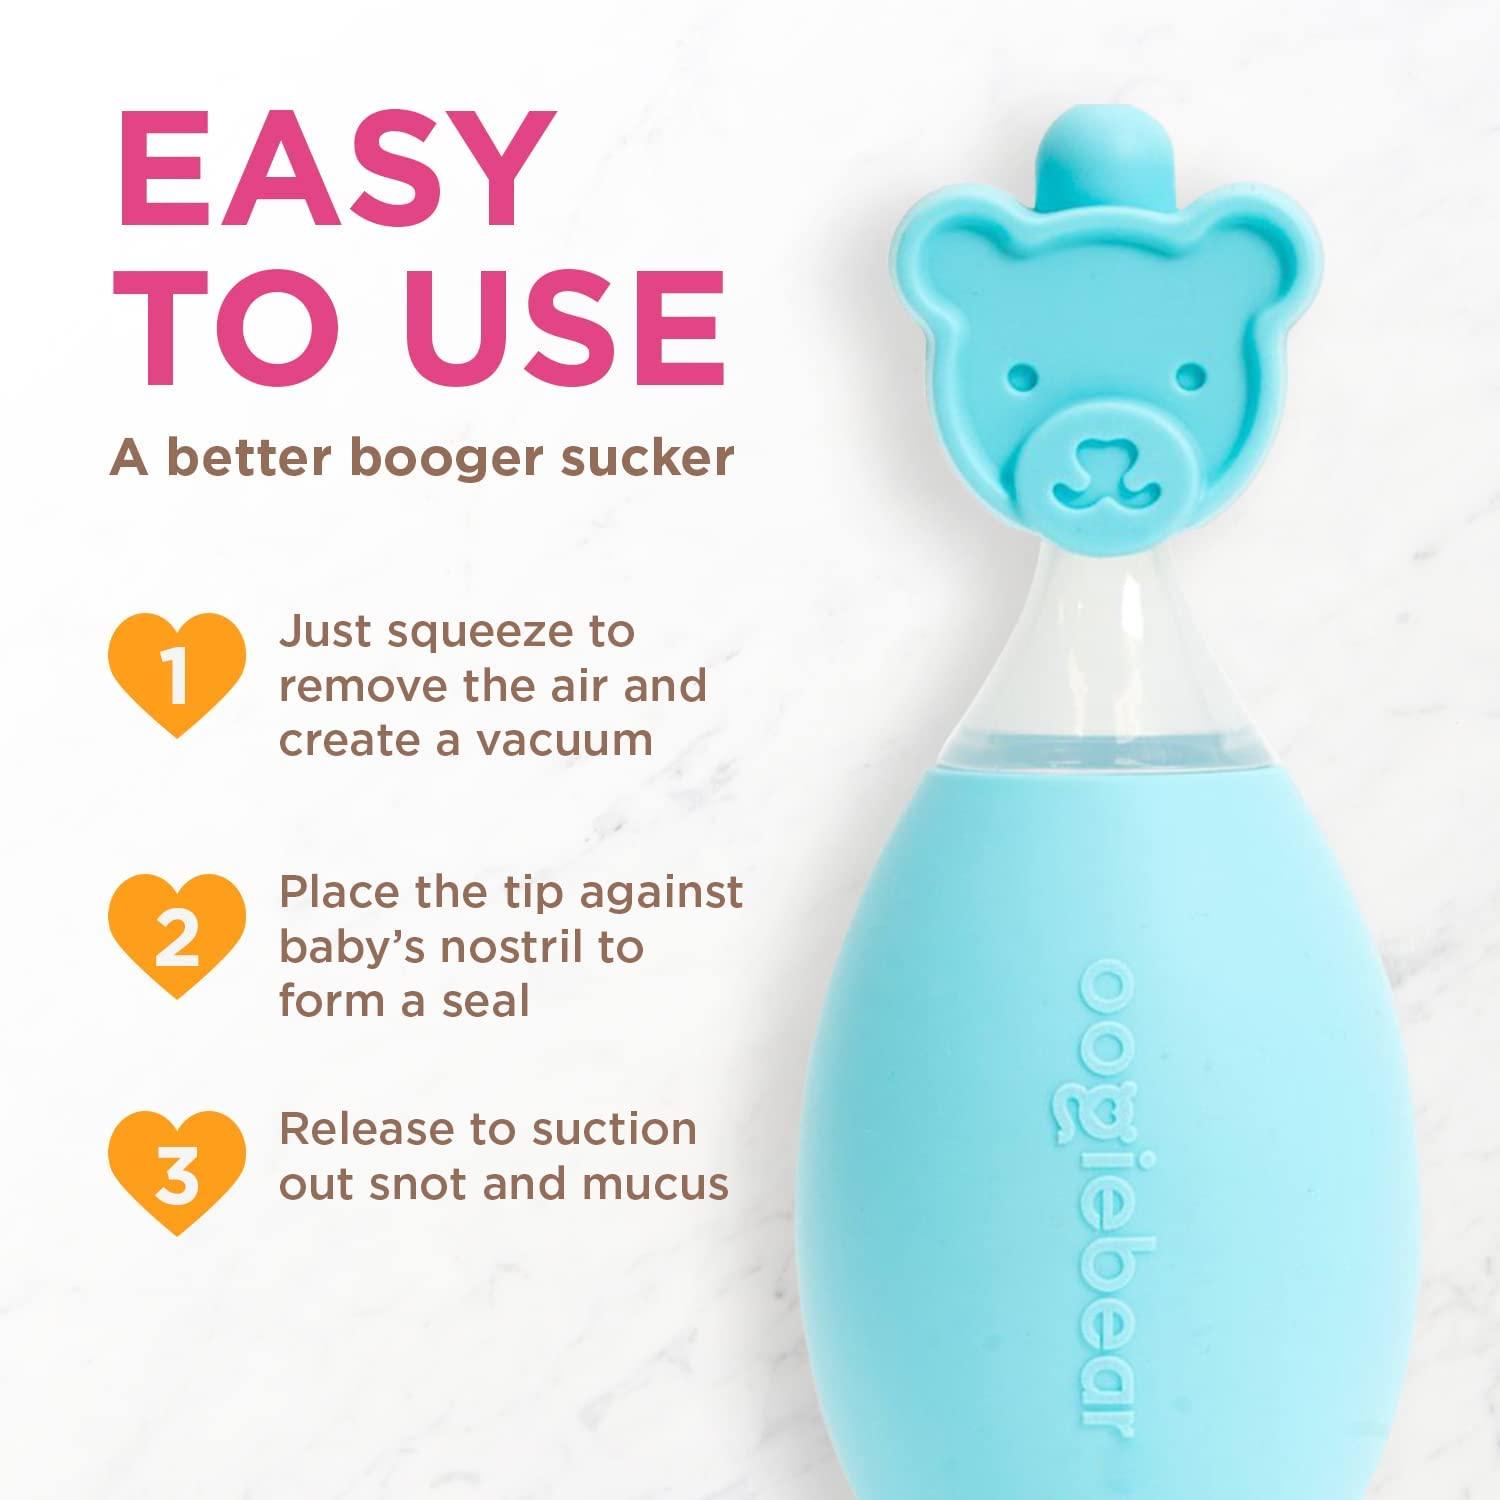 oogiebear Bear Pair — The Safe Baby Booger Cleaner and Nose Sucker Duo, Bulb Aspirator and 2-in-1 Nose and Ear Wax Cleaner